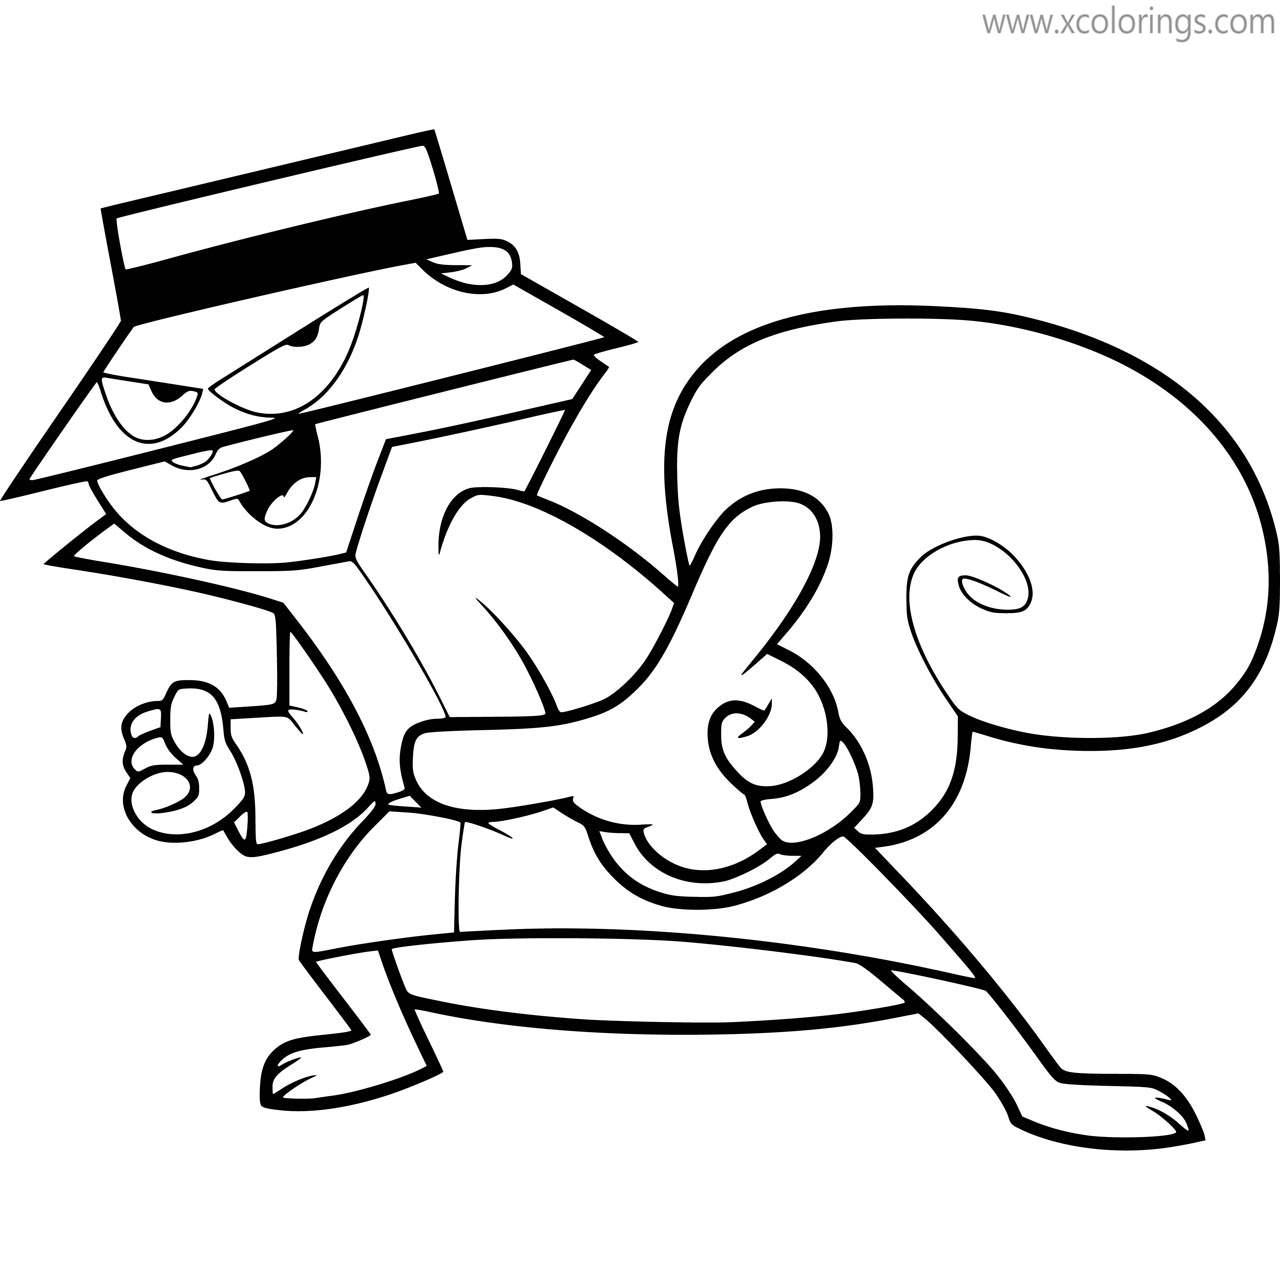 Free Secret Squirrel is Exciting Coloring Page printable